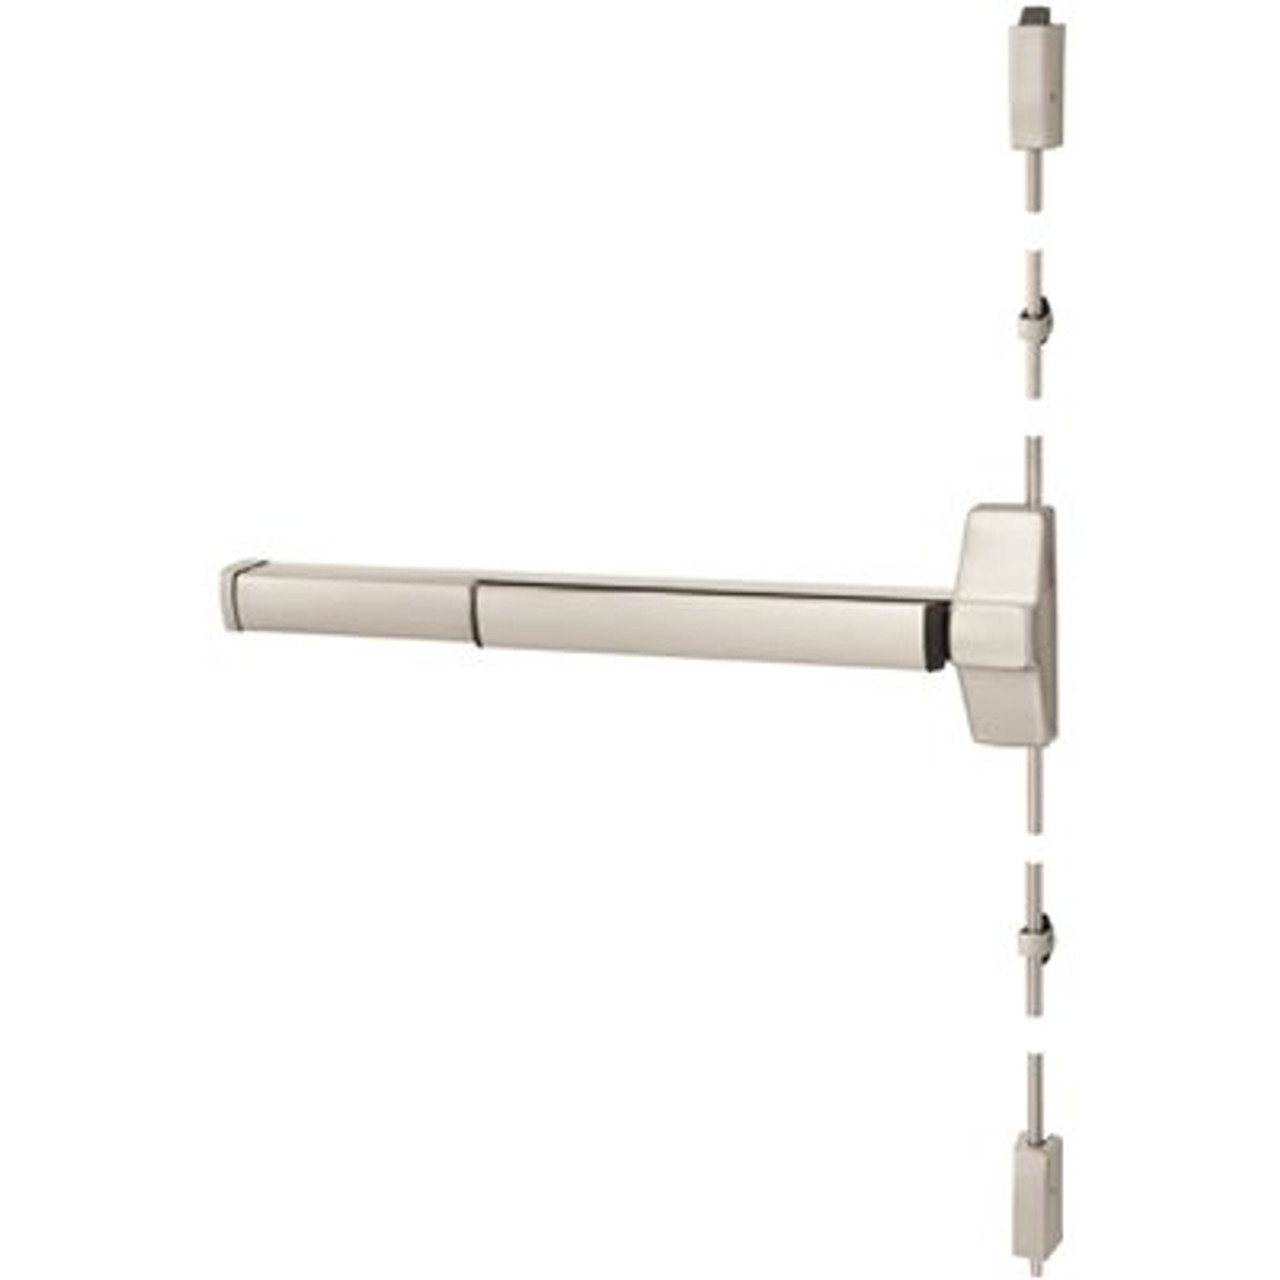 Corbin Russwin Ed5000 Series Grade 1, Stainless Steel Fire Rated Surface Vertical Rod Exit Device, Exit Only - 316650749